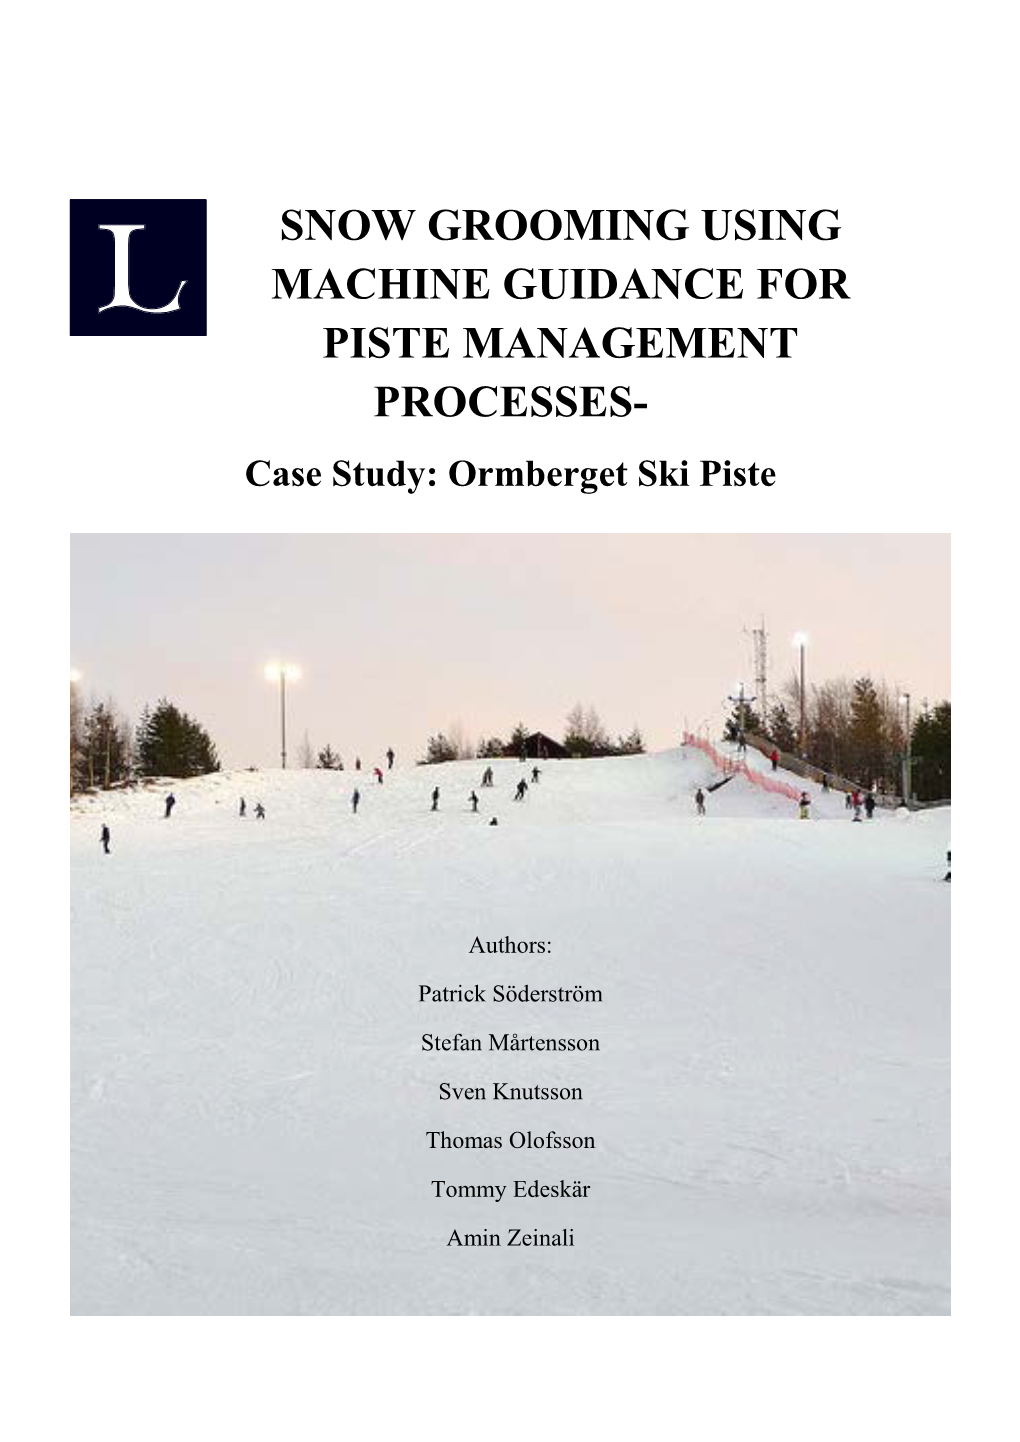 SNOW GROOMING USING MACHINE GUIDANCE for PISTE MANAGEMENT PROCESSES- Case Study: Ormberget Ski Piste